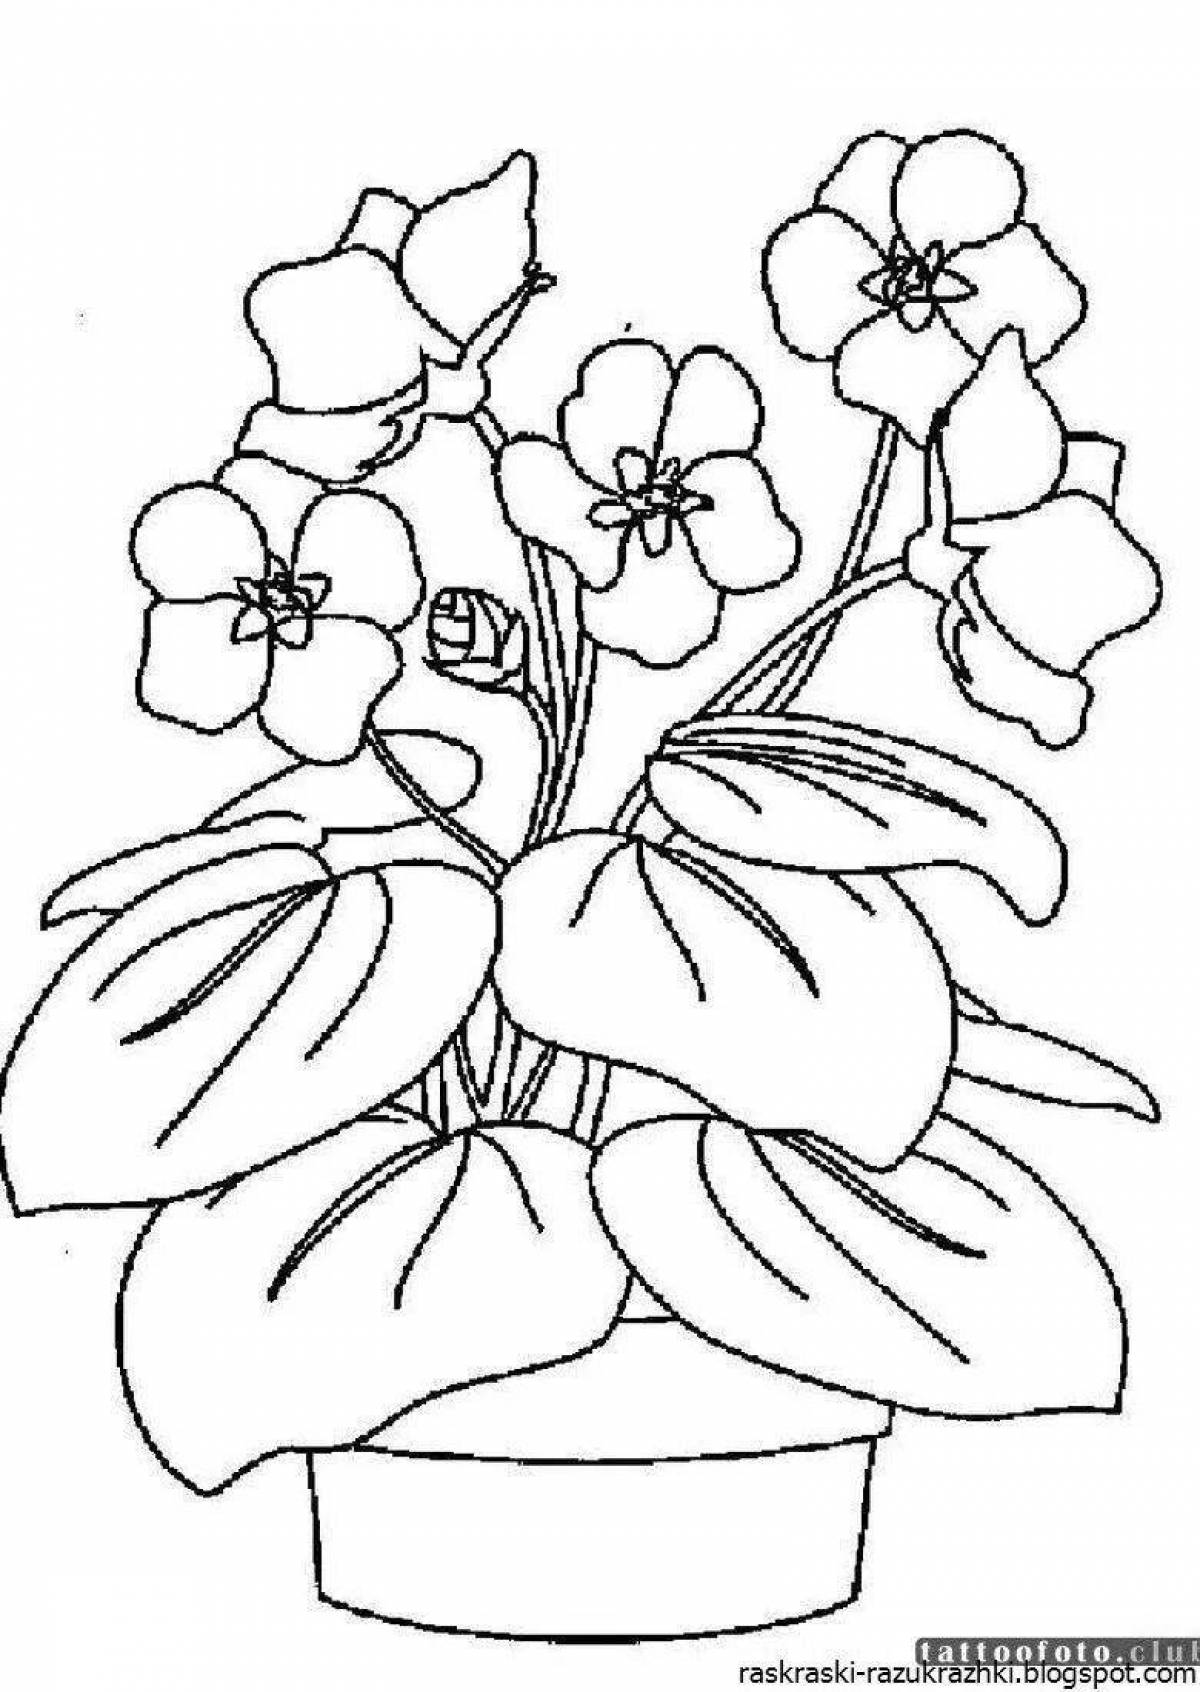 Blissful purple houseplants coloring page